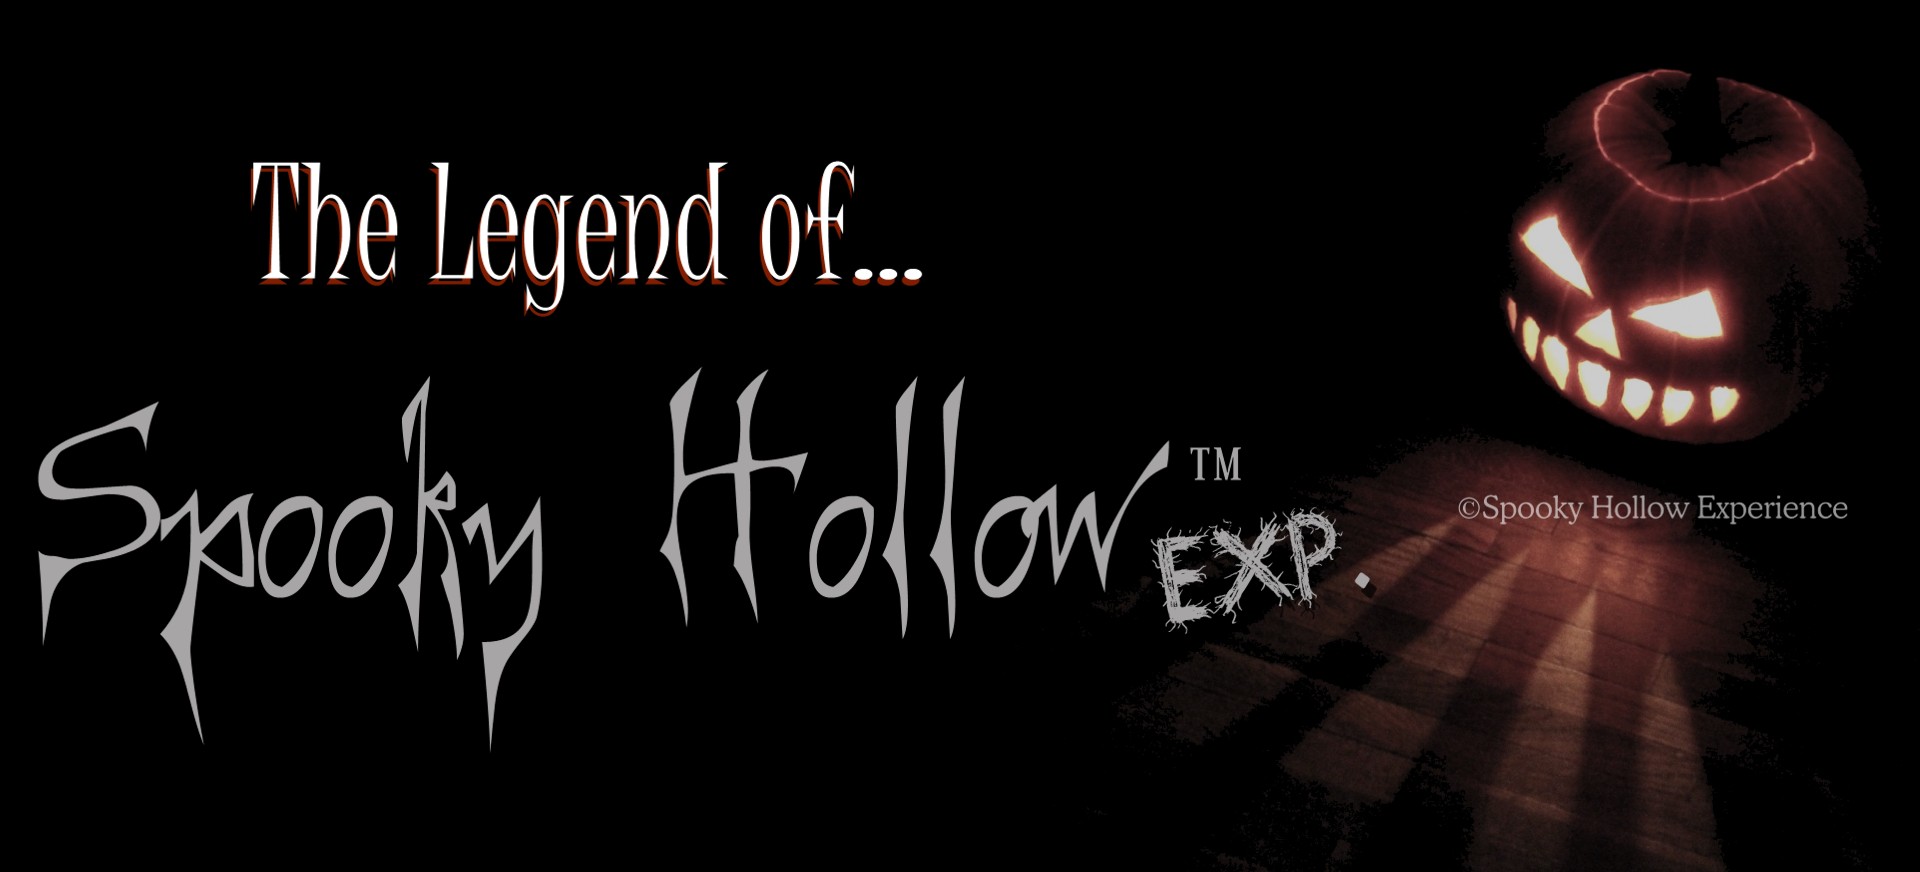 Spooky Hollow Experience Copyright The Legend